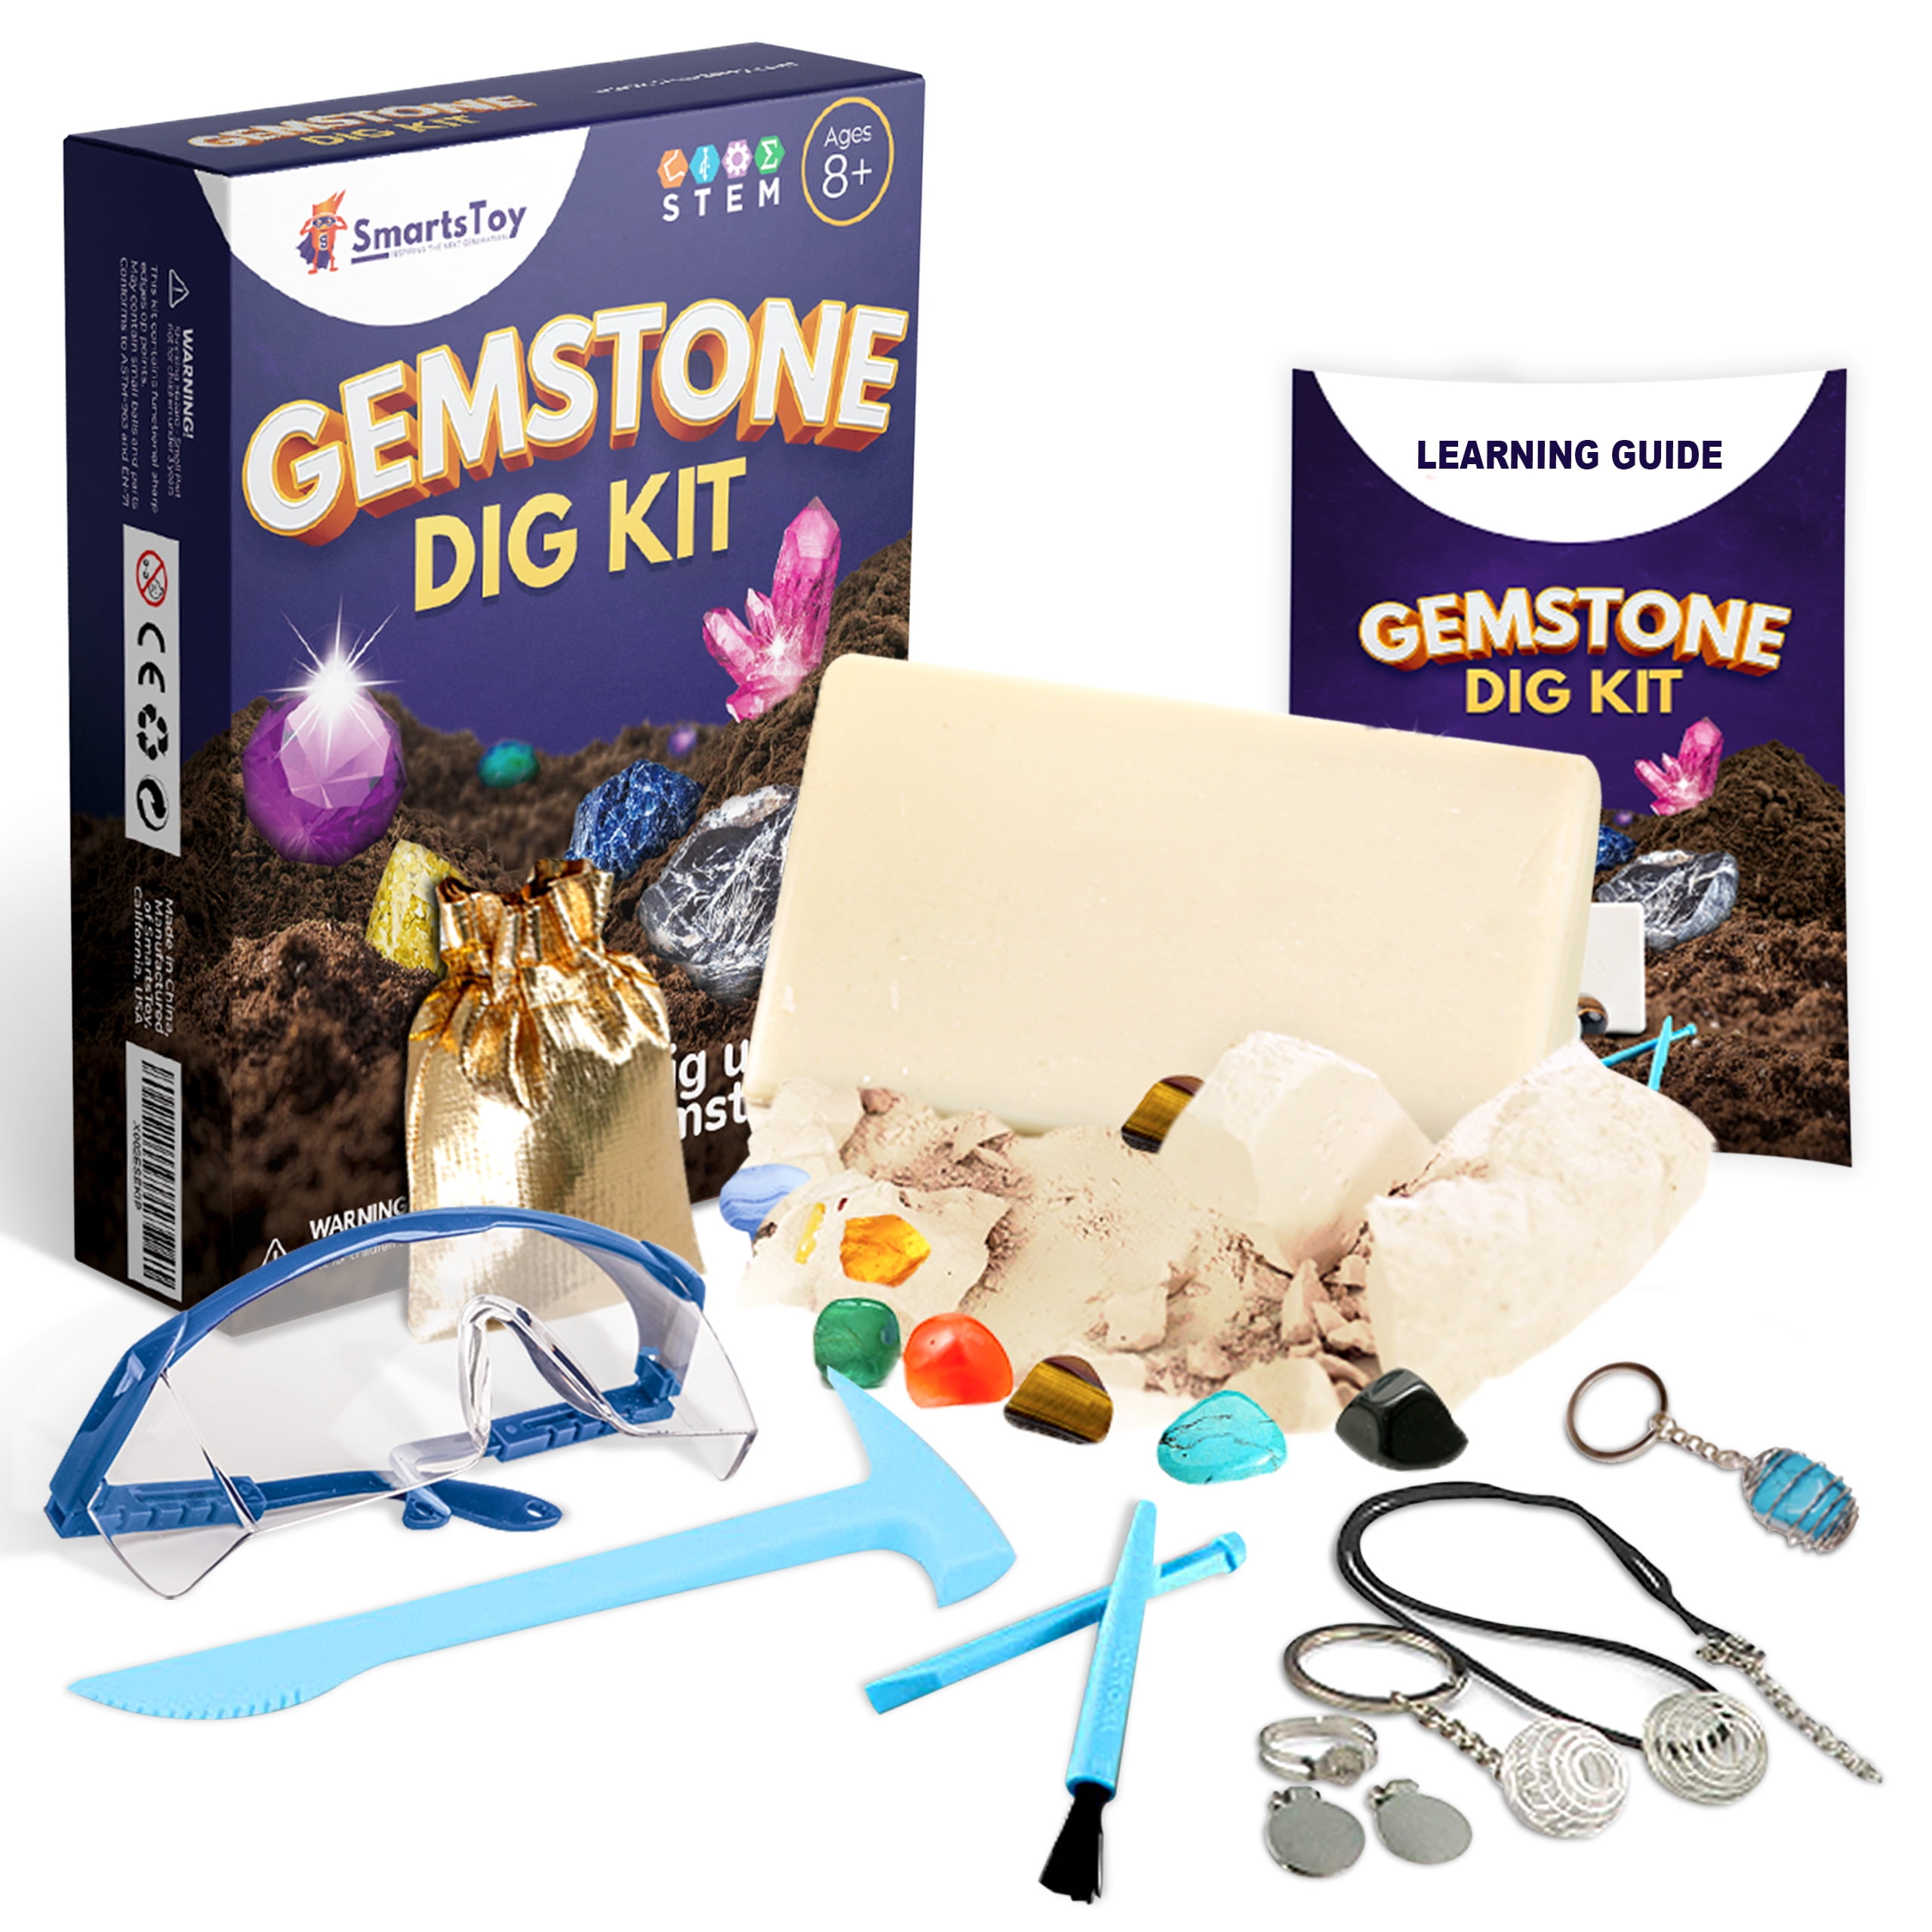 Geology Archaeology Rock Collection kit Gift for Boys and Girls 8-12 Dig Up 12 Real Gems WALARLO Science Gemstone Dig Kit Stem Crystals Mineral Excavation Toys for Kids 